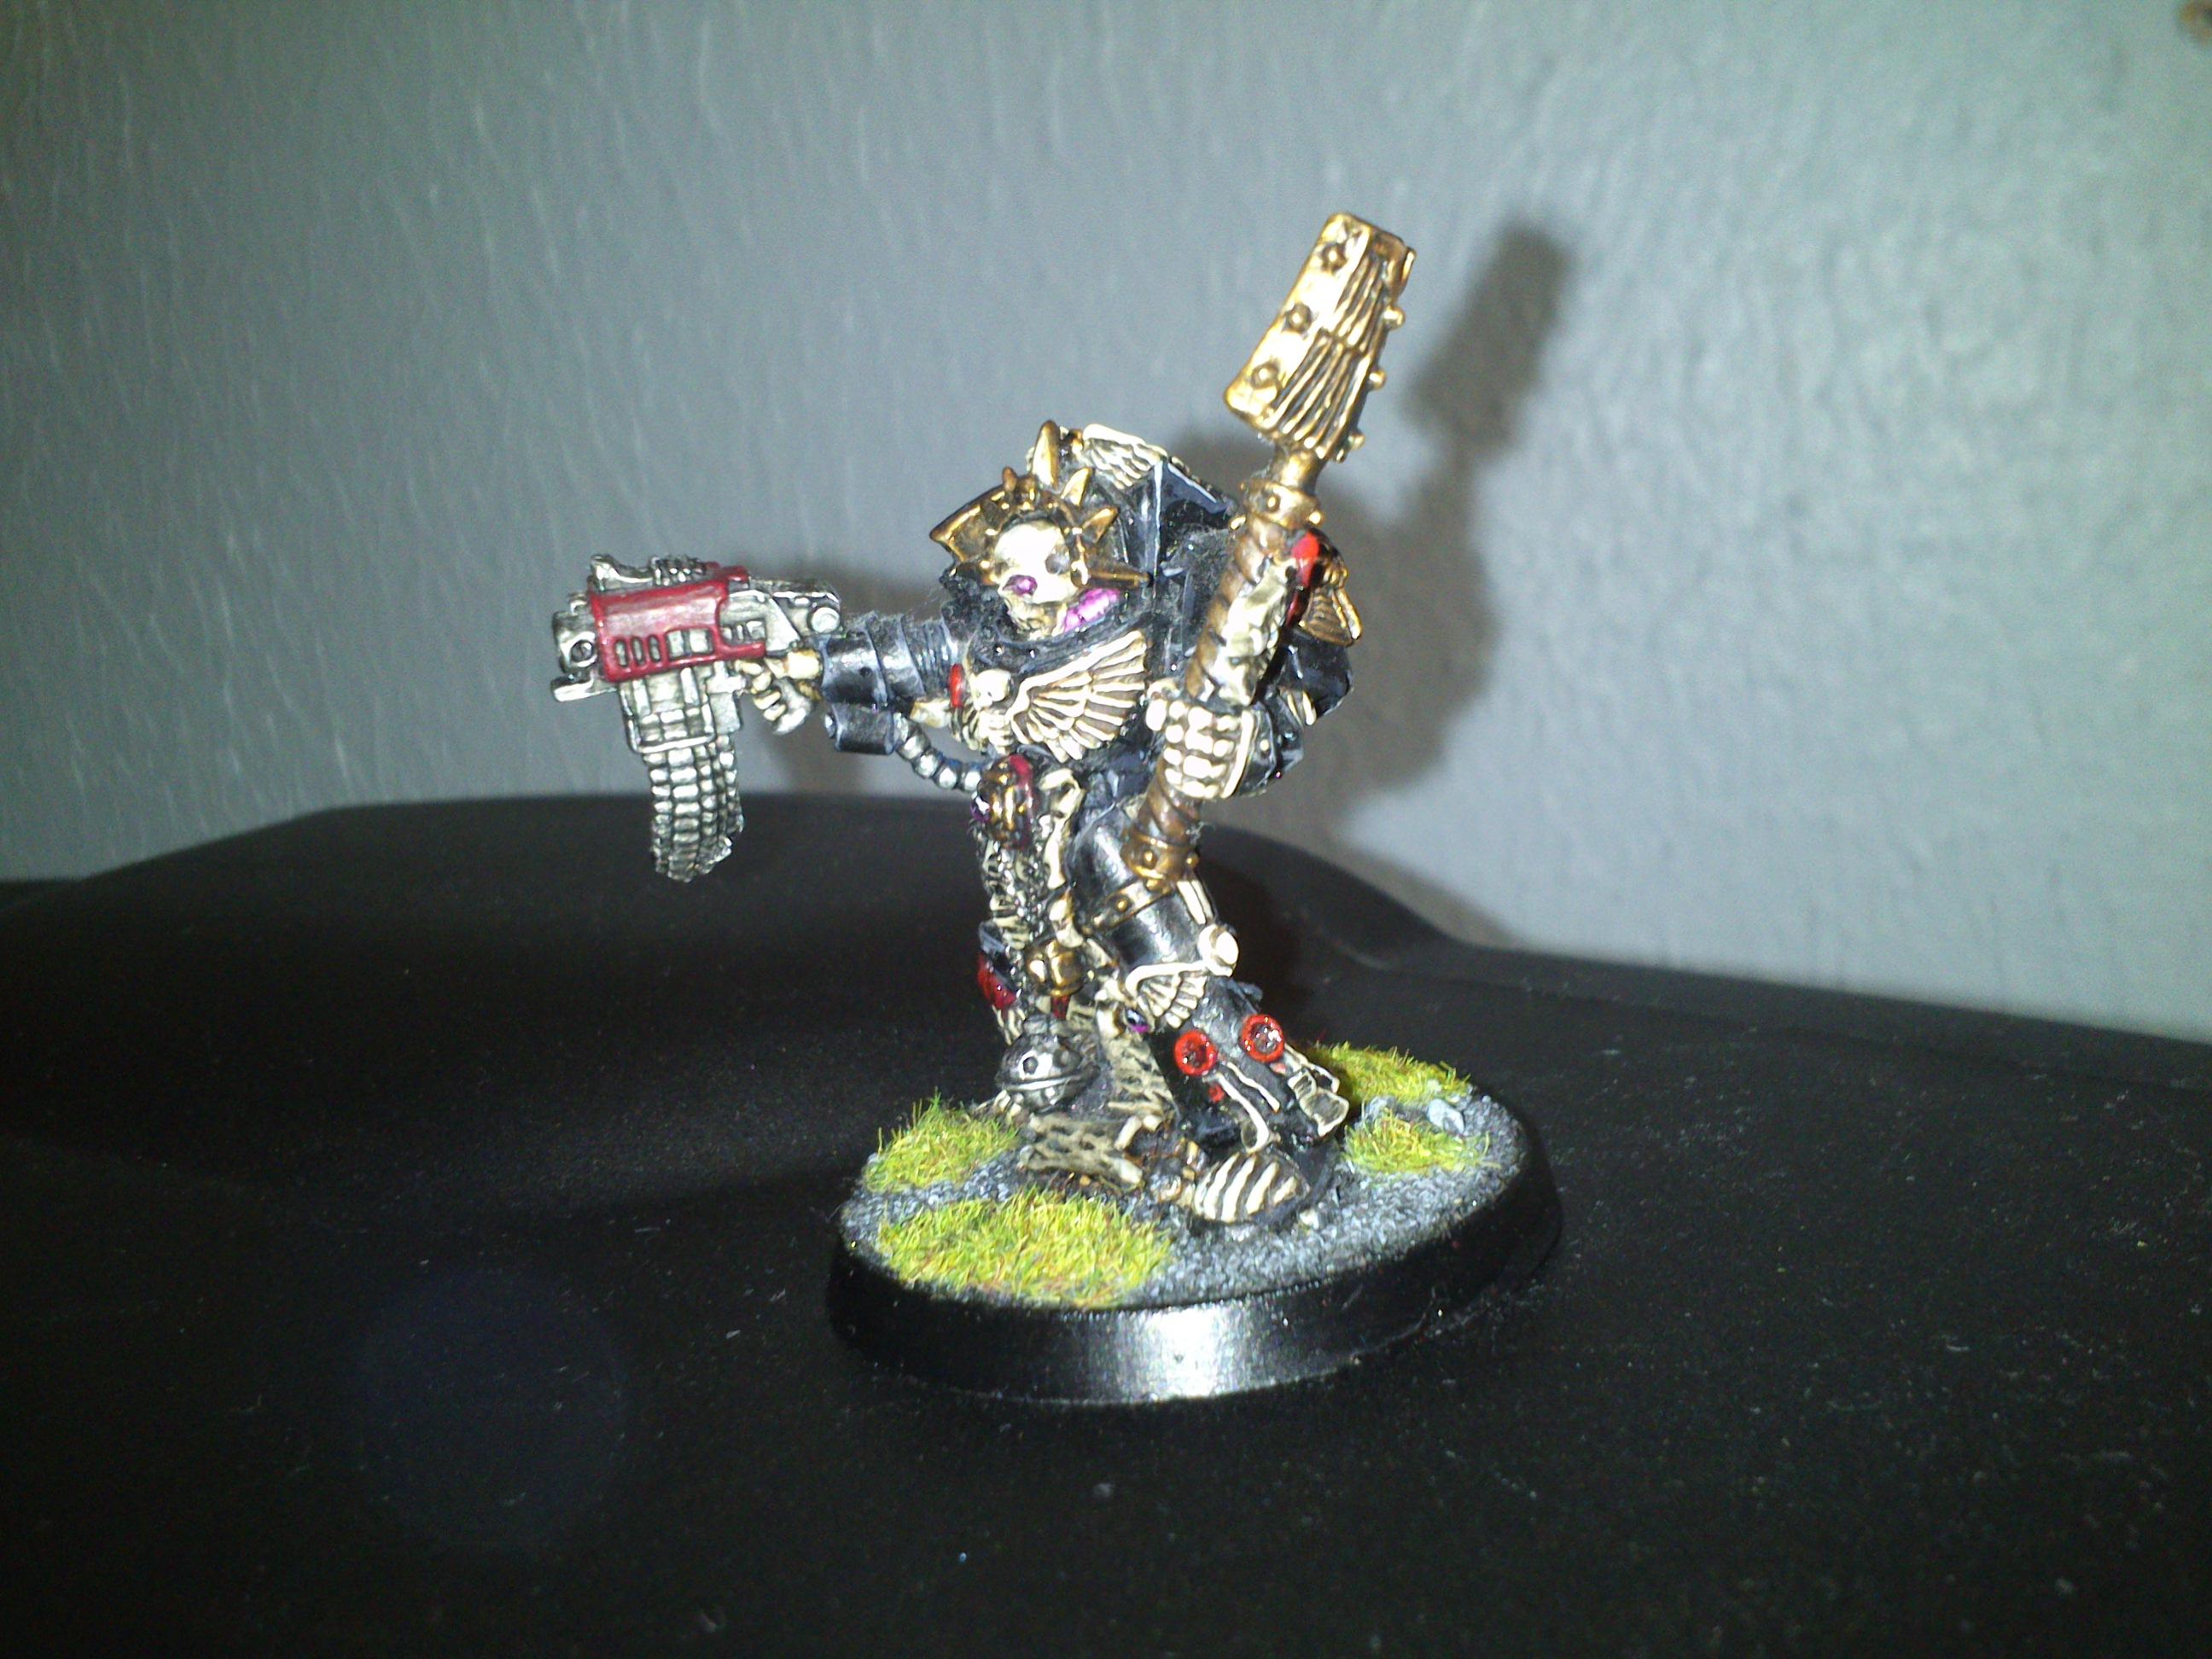 Chaplain side view